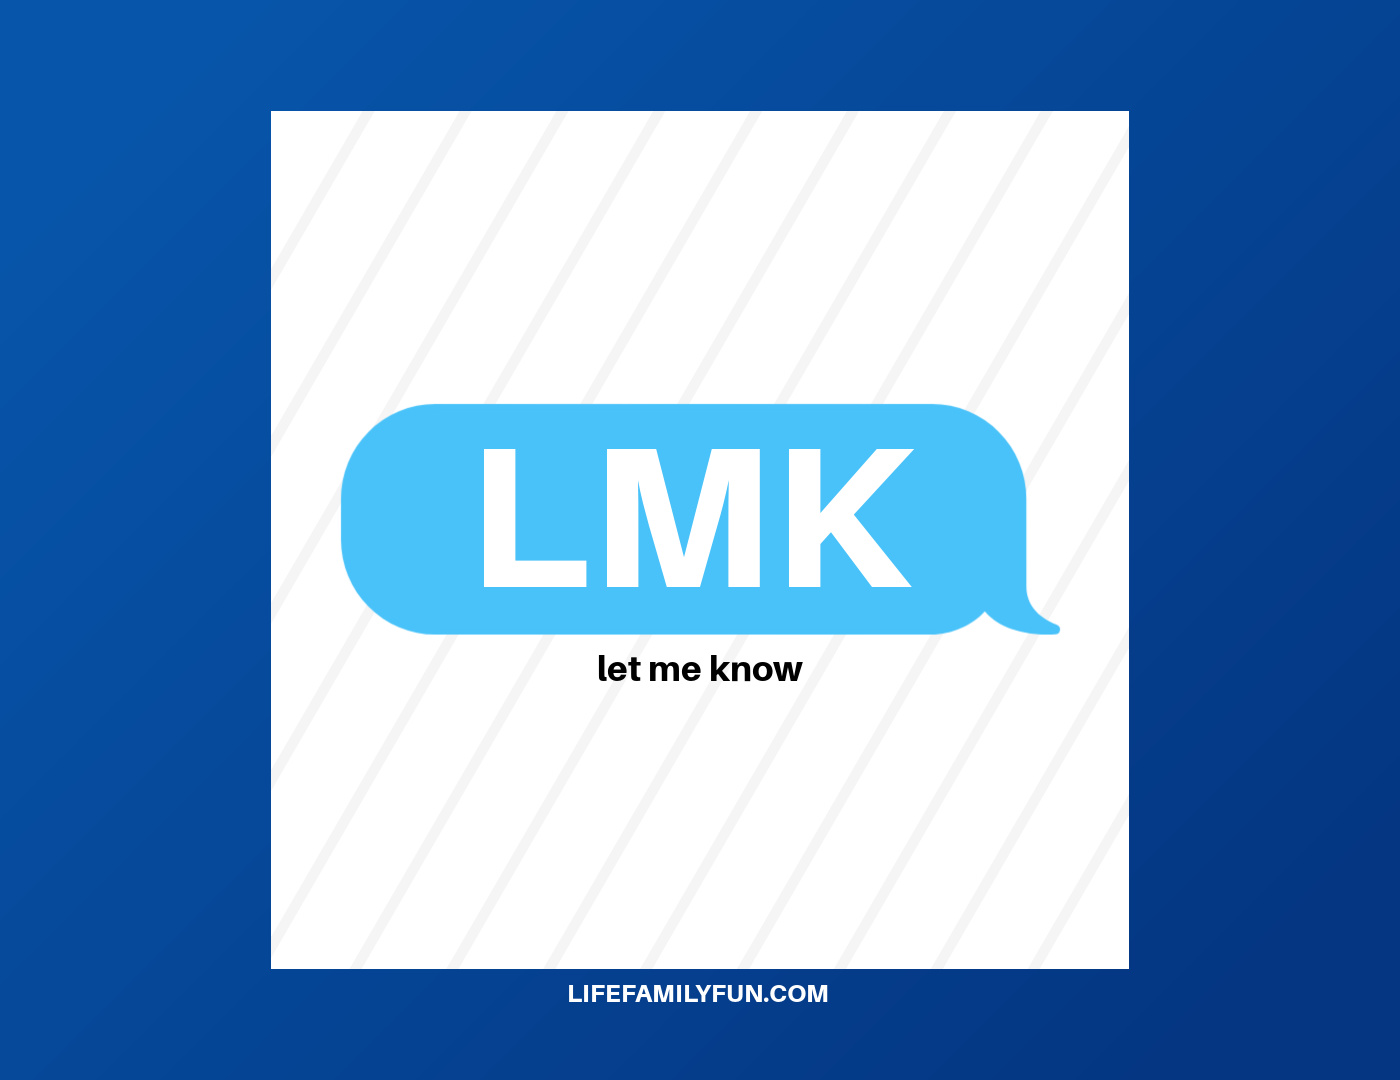 What Does LMK Mean?